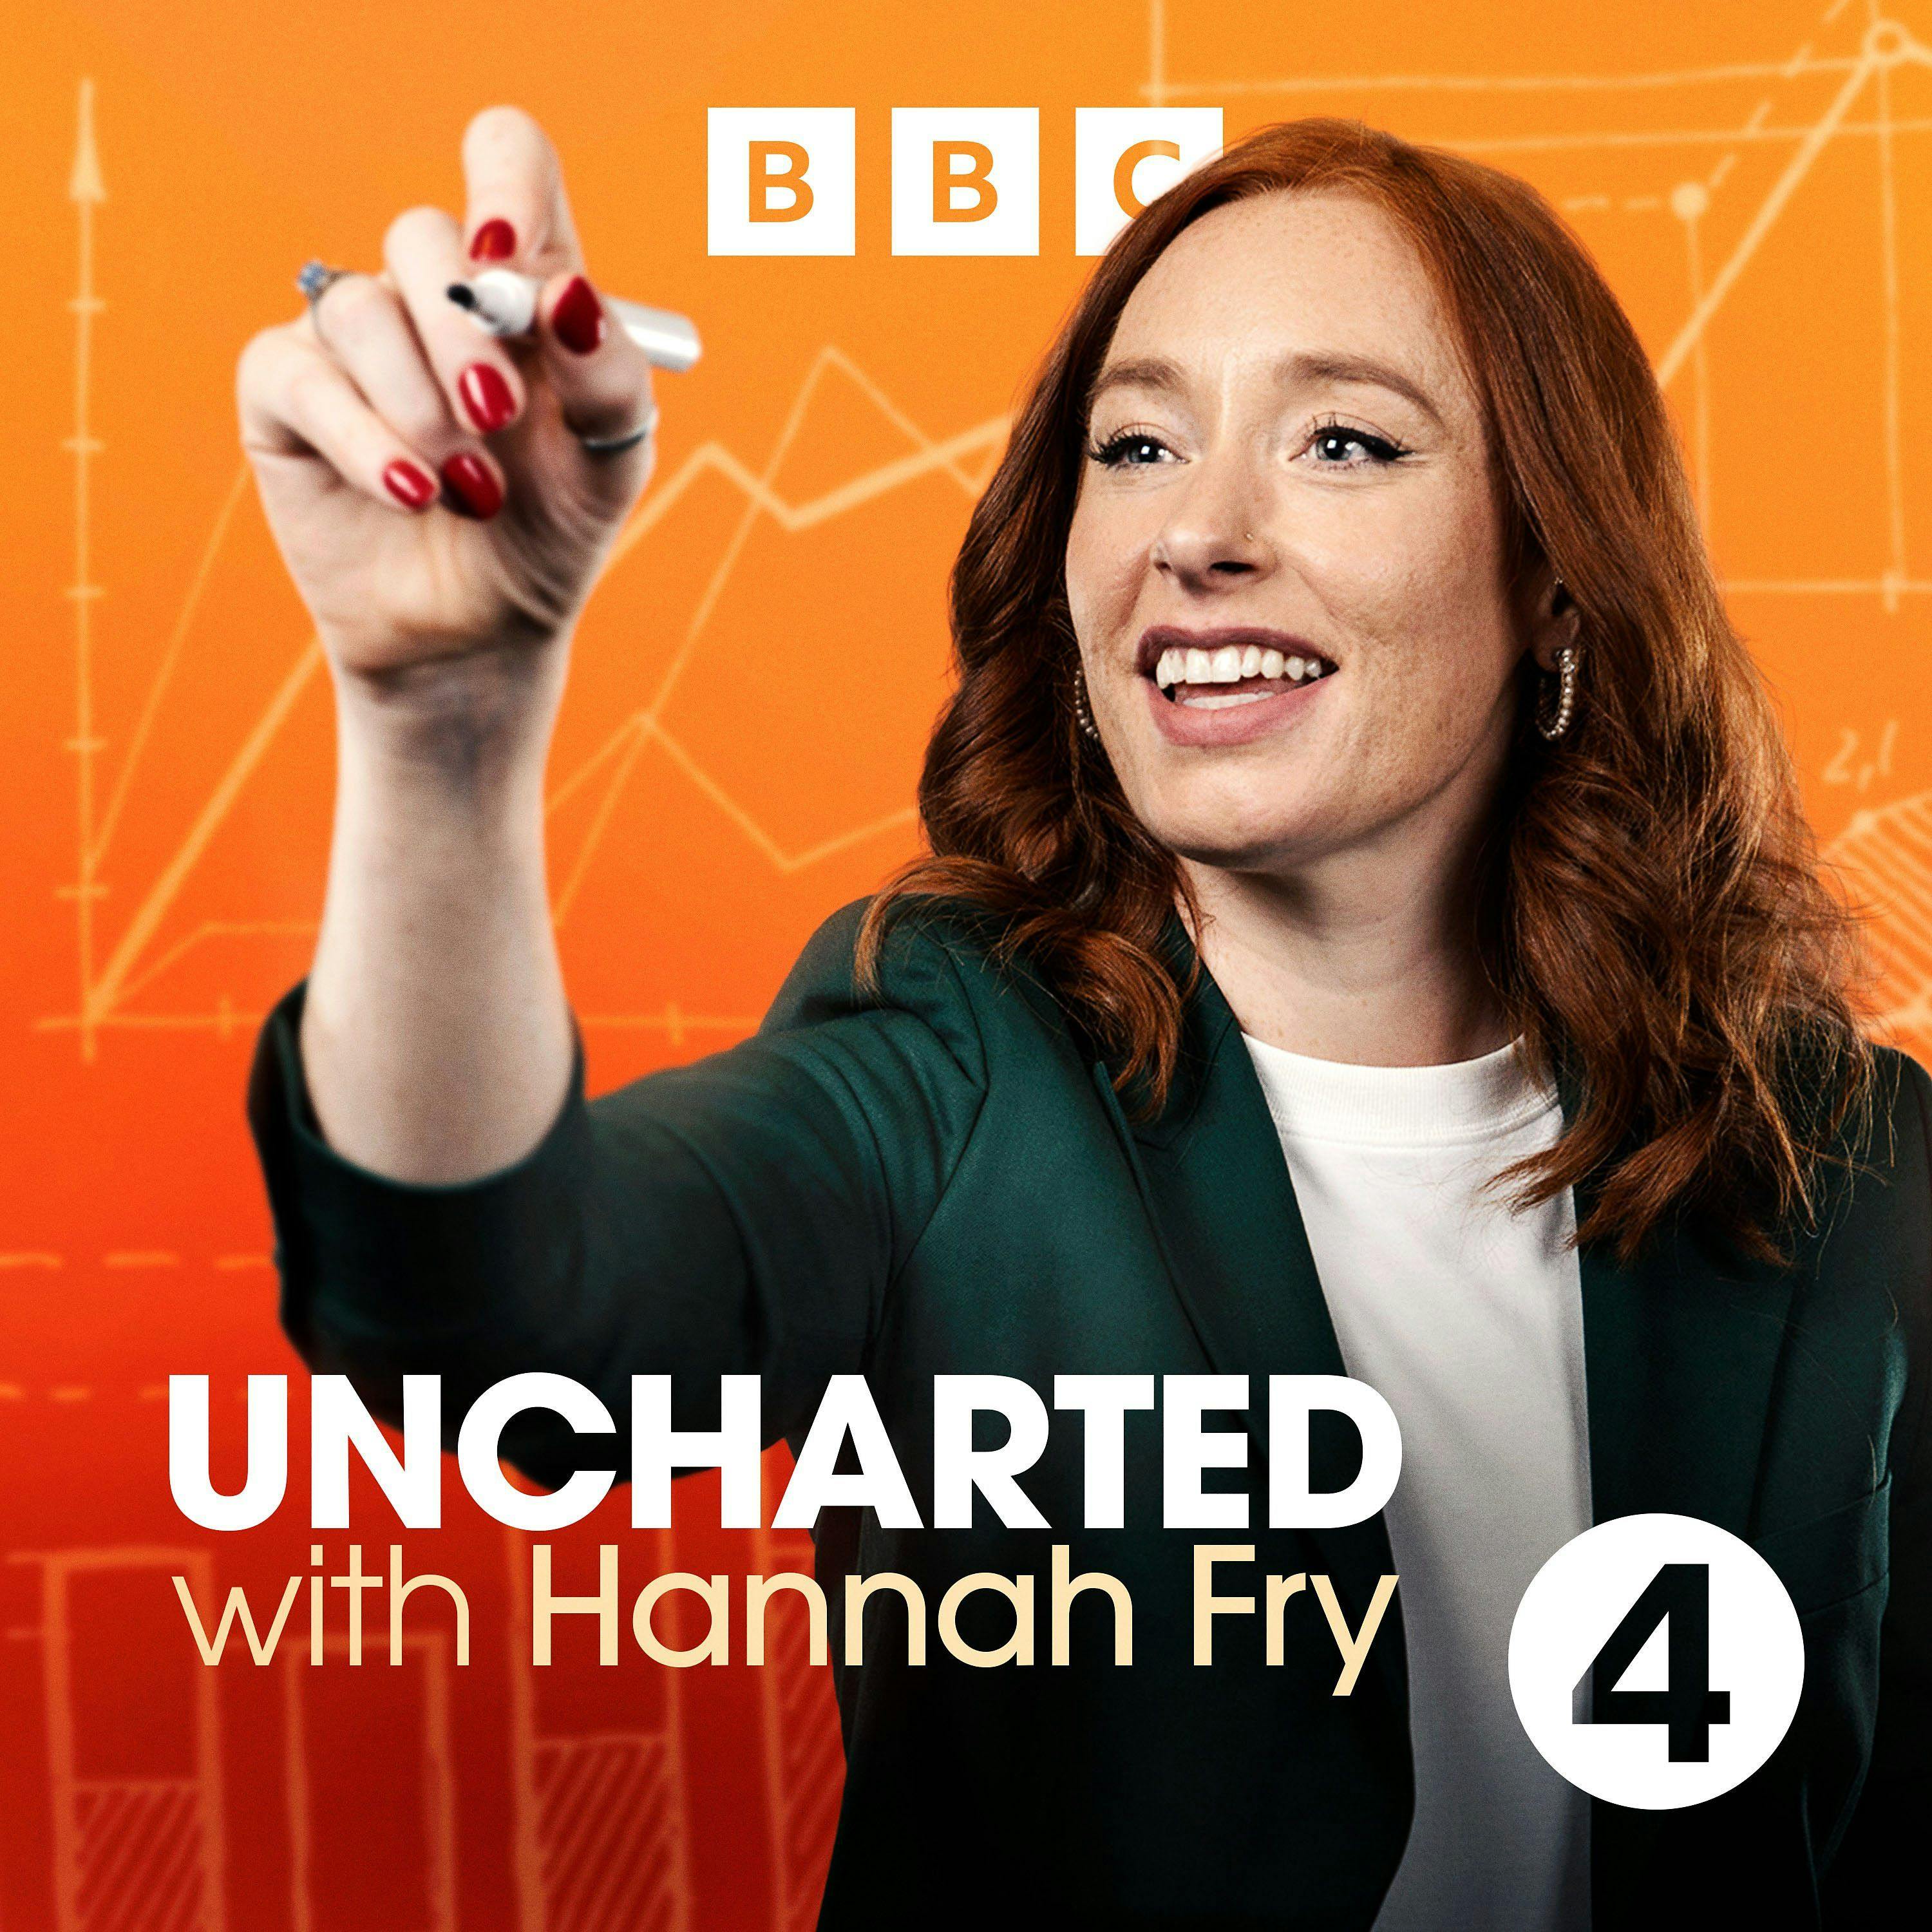 Uncharted with Hannah Fry